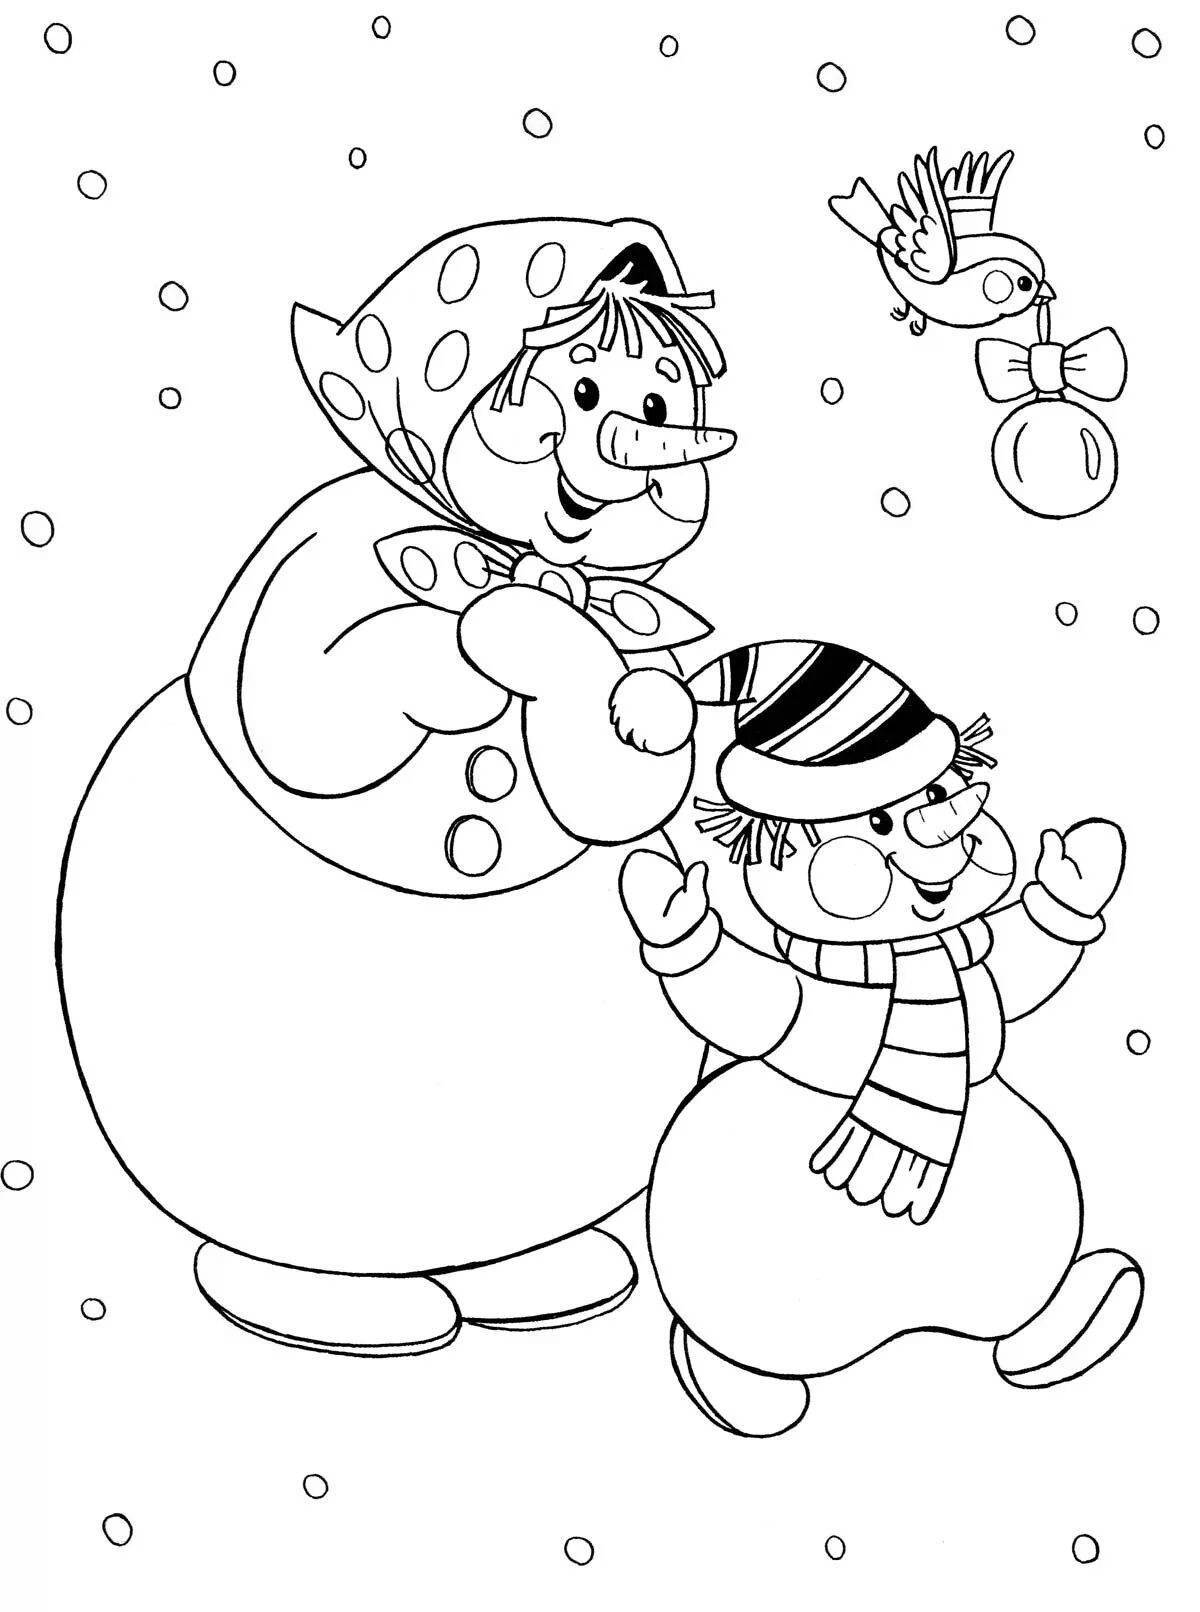 Coloring bright Christmas snowman